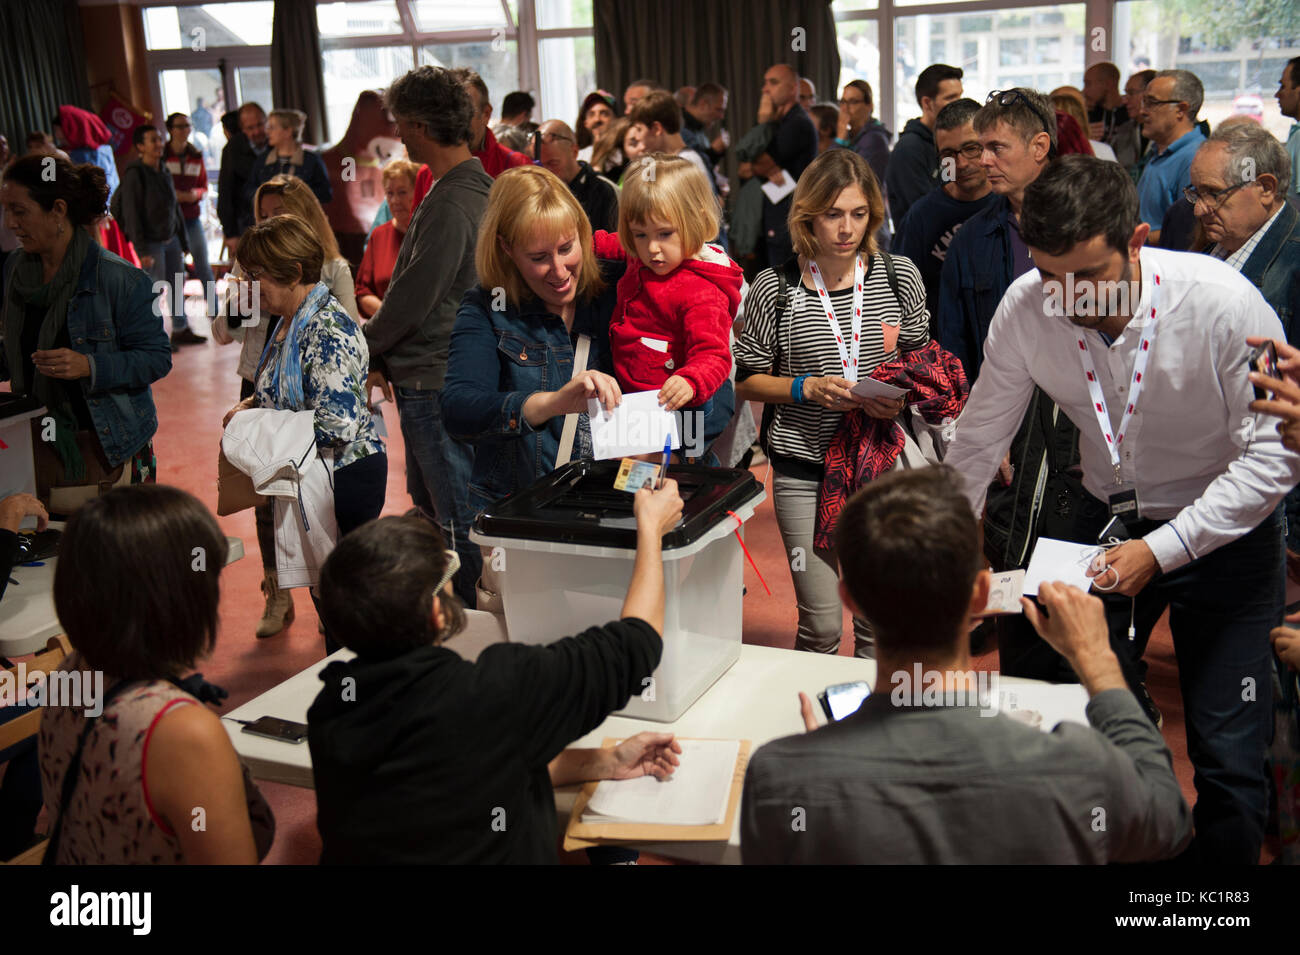 Barcelona, Catalonia. October 1, 2017. Even the violent acts of the police in accordance with the orders of the Spanish government, the voting takes place with total normality and in a festive atmosphere. Stock Photo